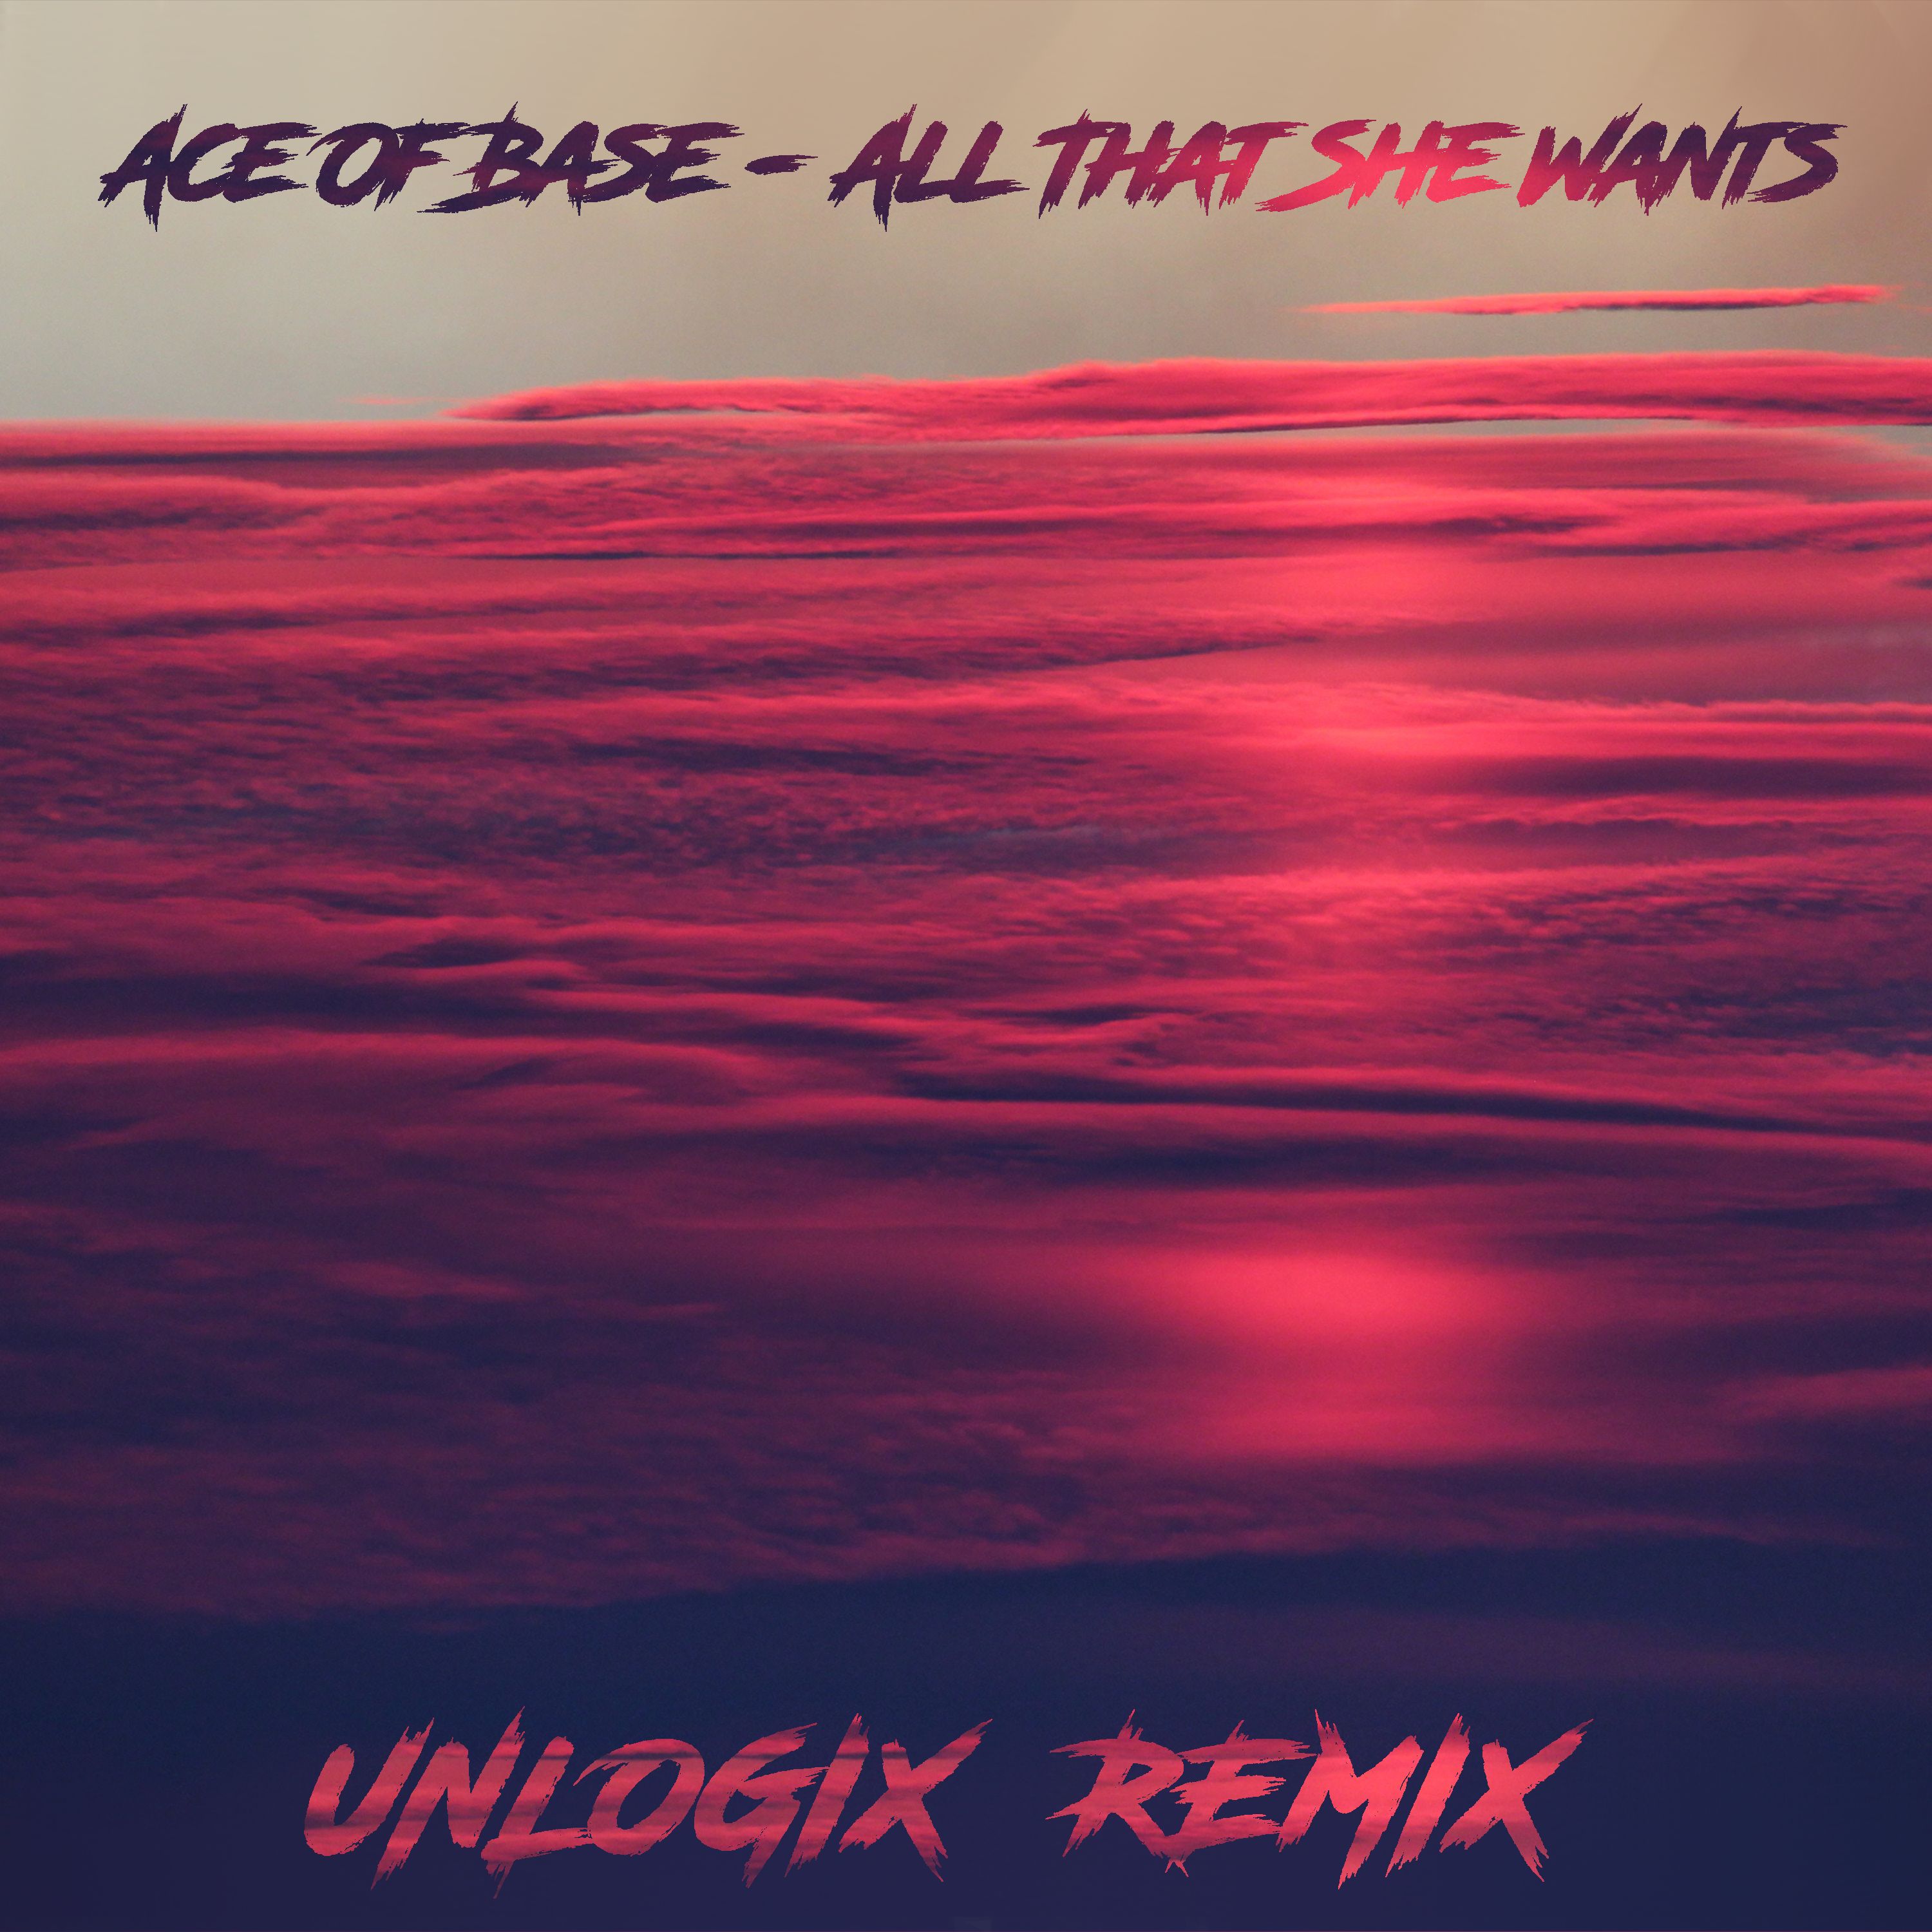 ¡Descargar Ace Of Base - All That She Wants ( Unlogix Remix ) "FREE DOWNLOAD"